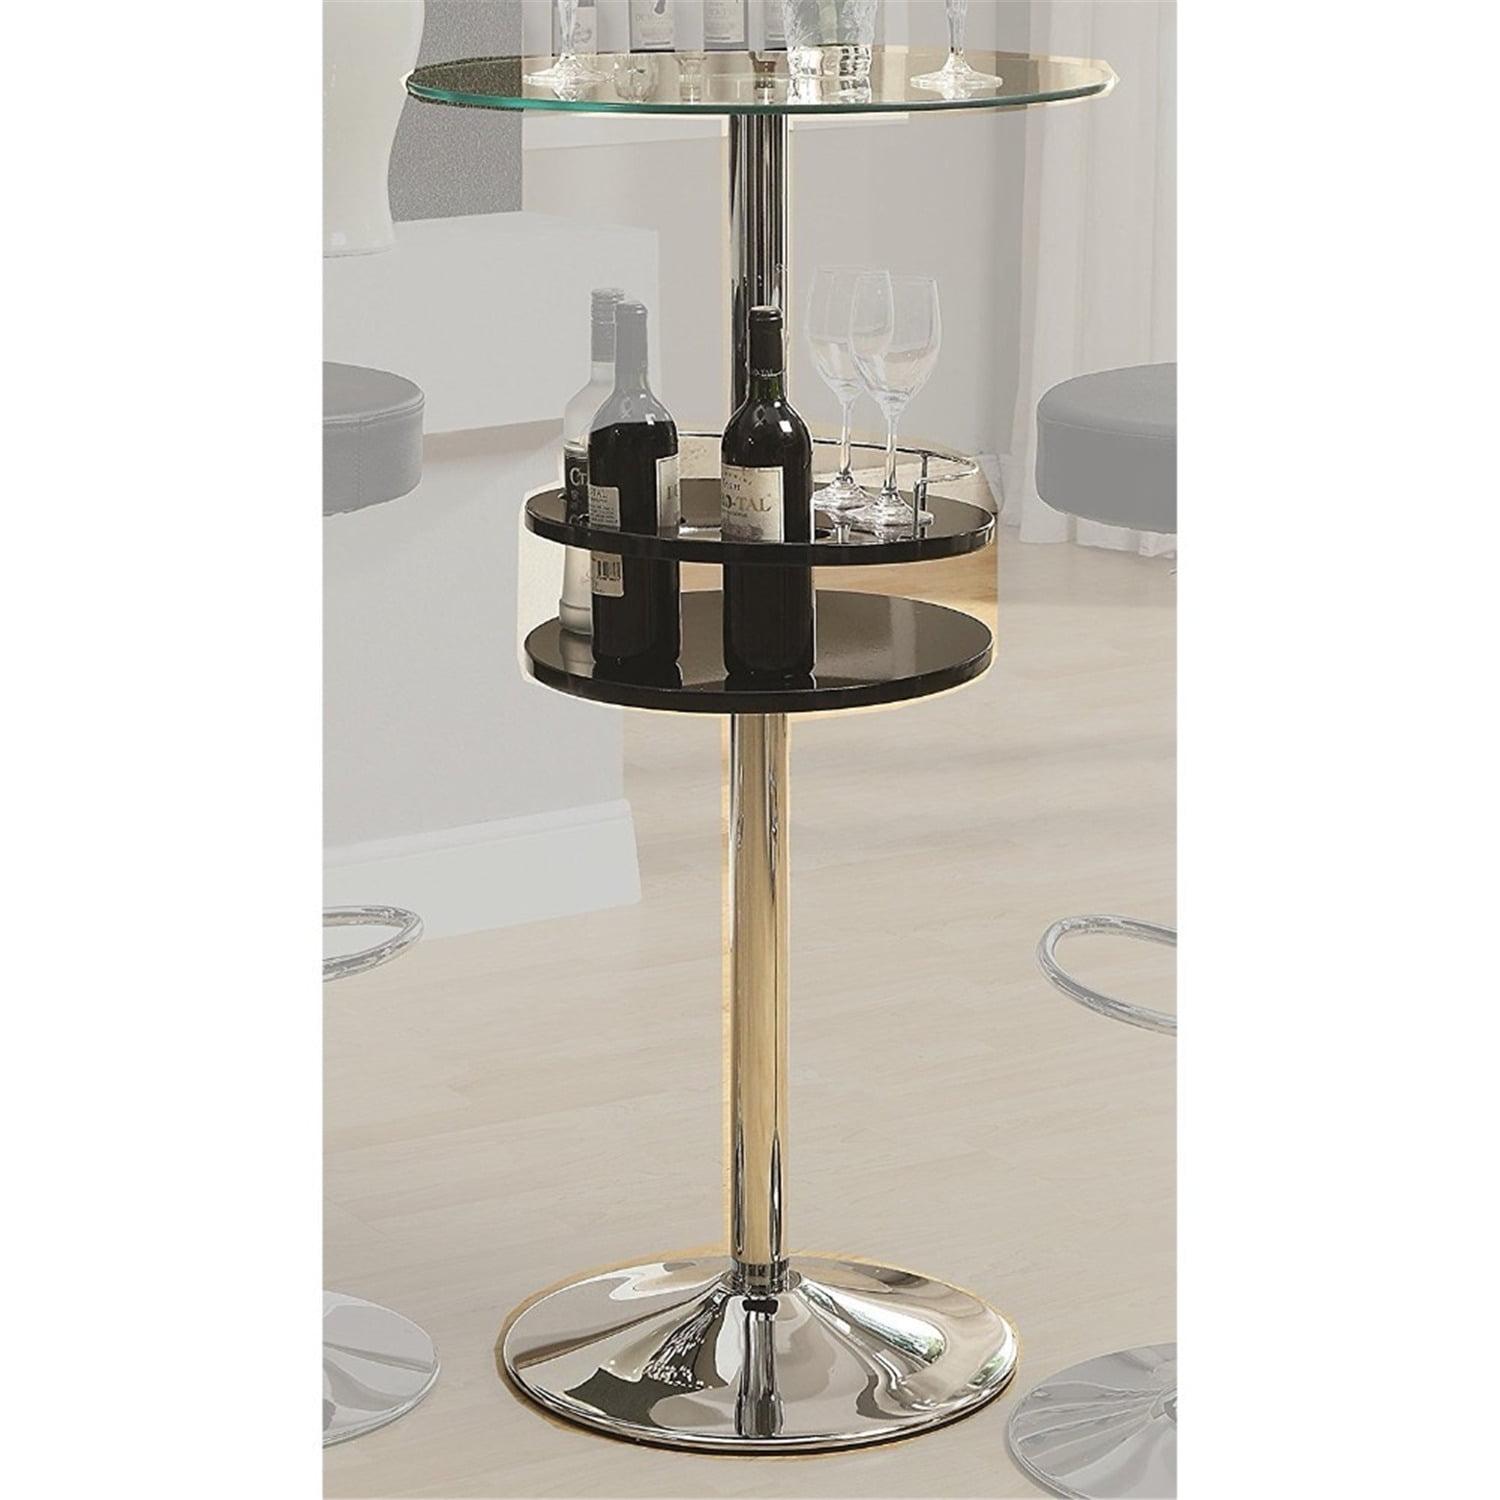 Contemporary Chrome Polished Round Bar Table with Glass Top and Storage